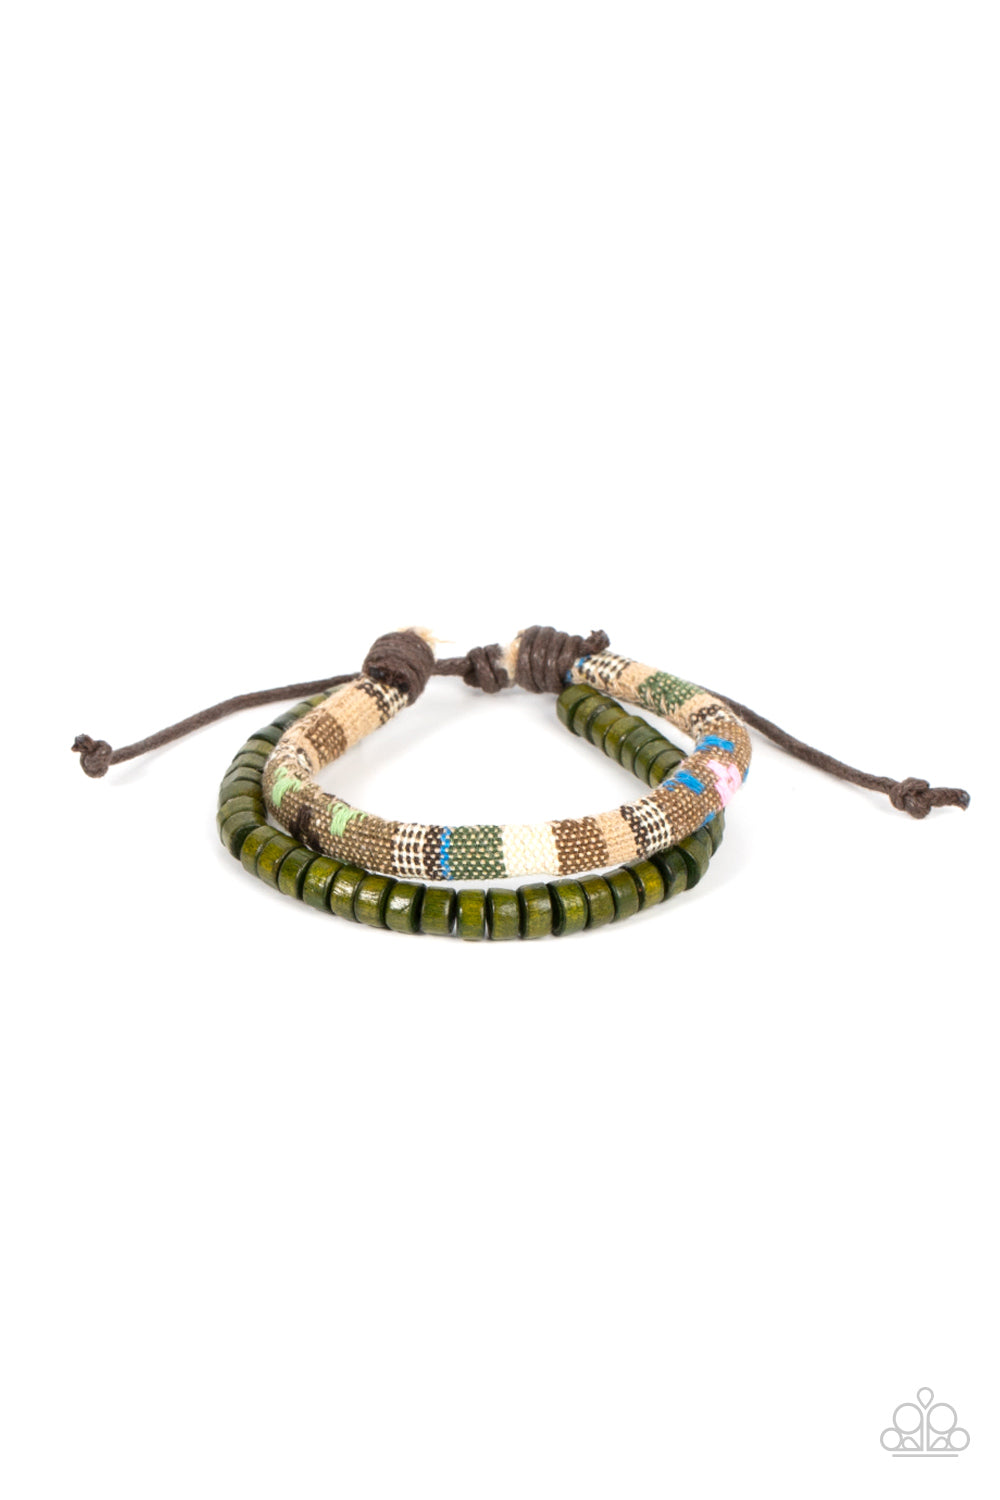 Pack your Poncho - Green Wooden Beads & Colorful Textile Banded Cord Paparazzi urban Bracelet